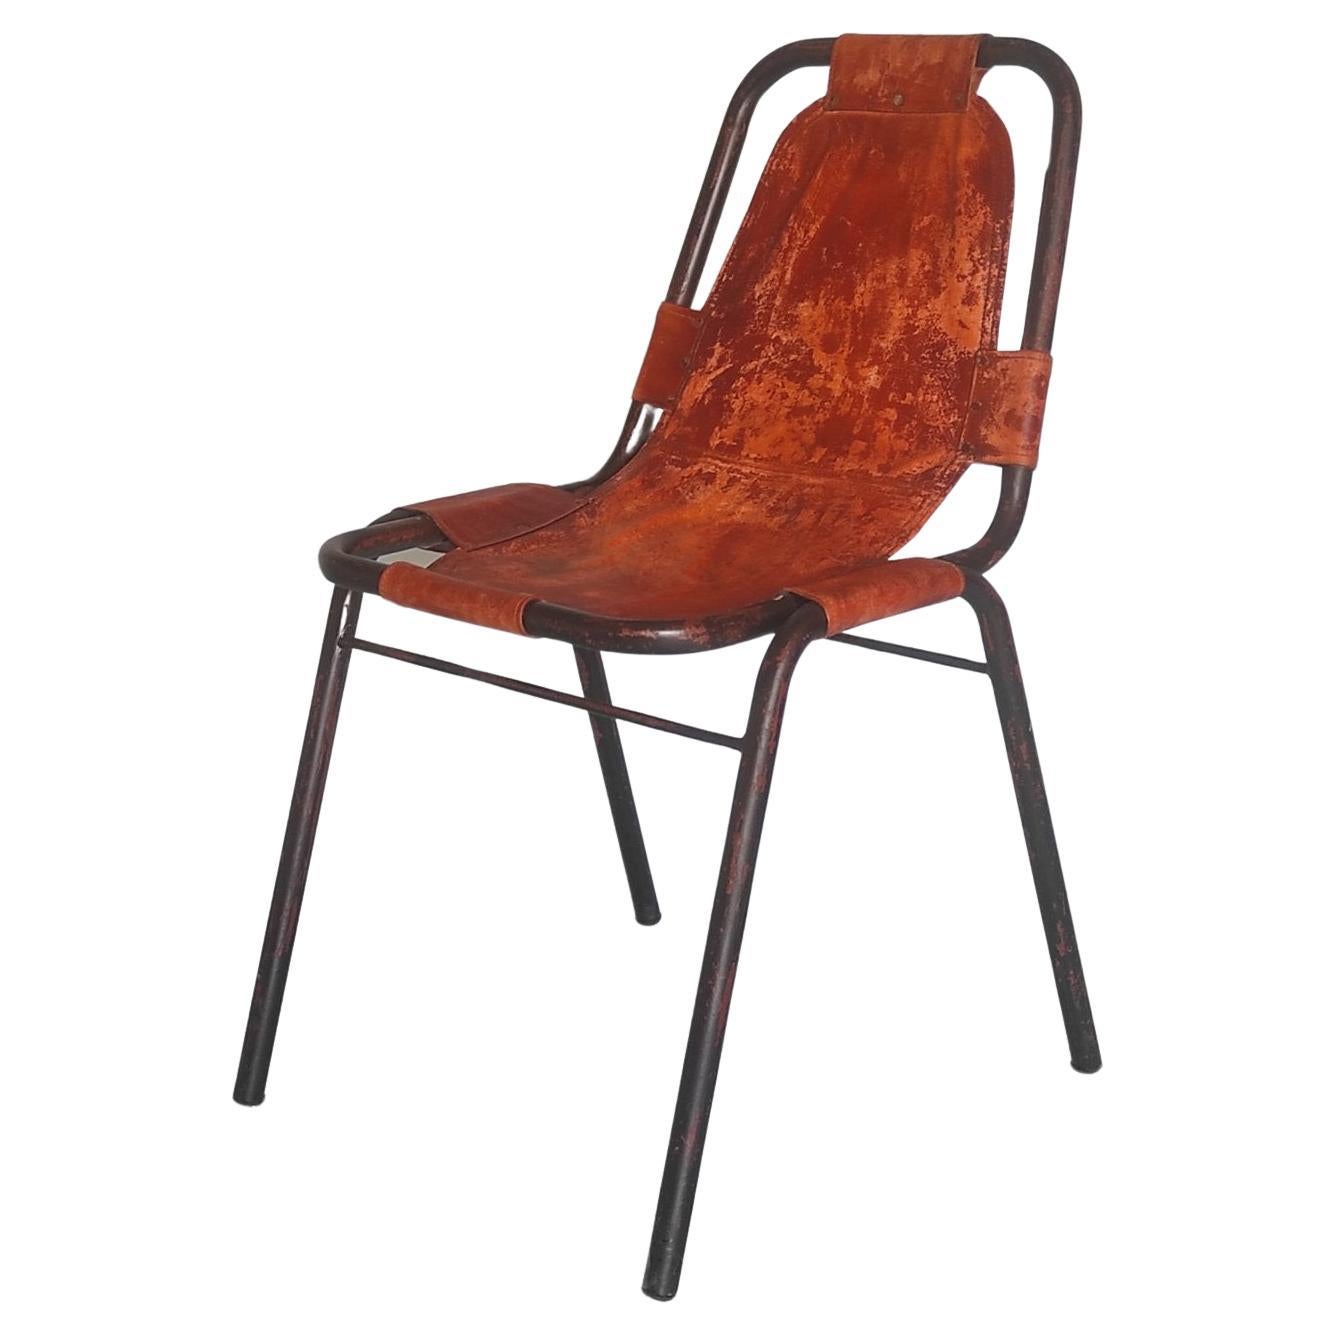 One of Two DalVera Les Arcs Chair 1960s